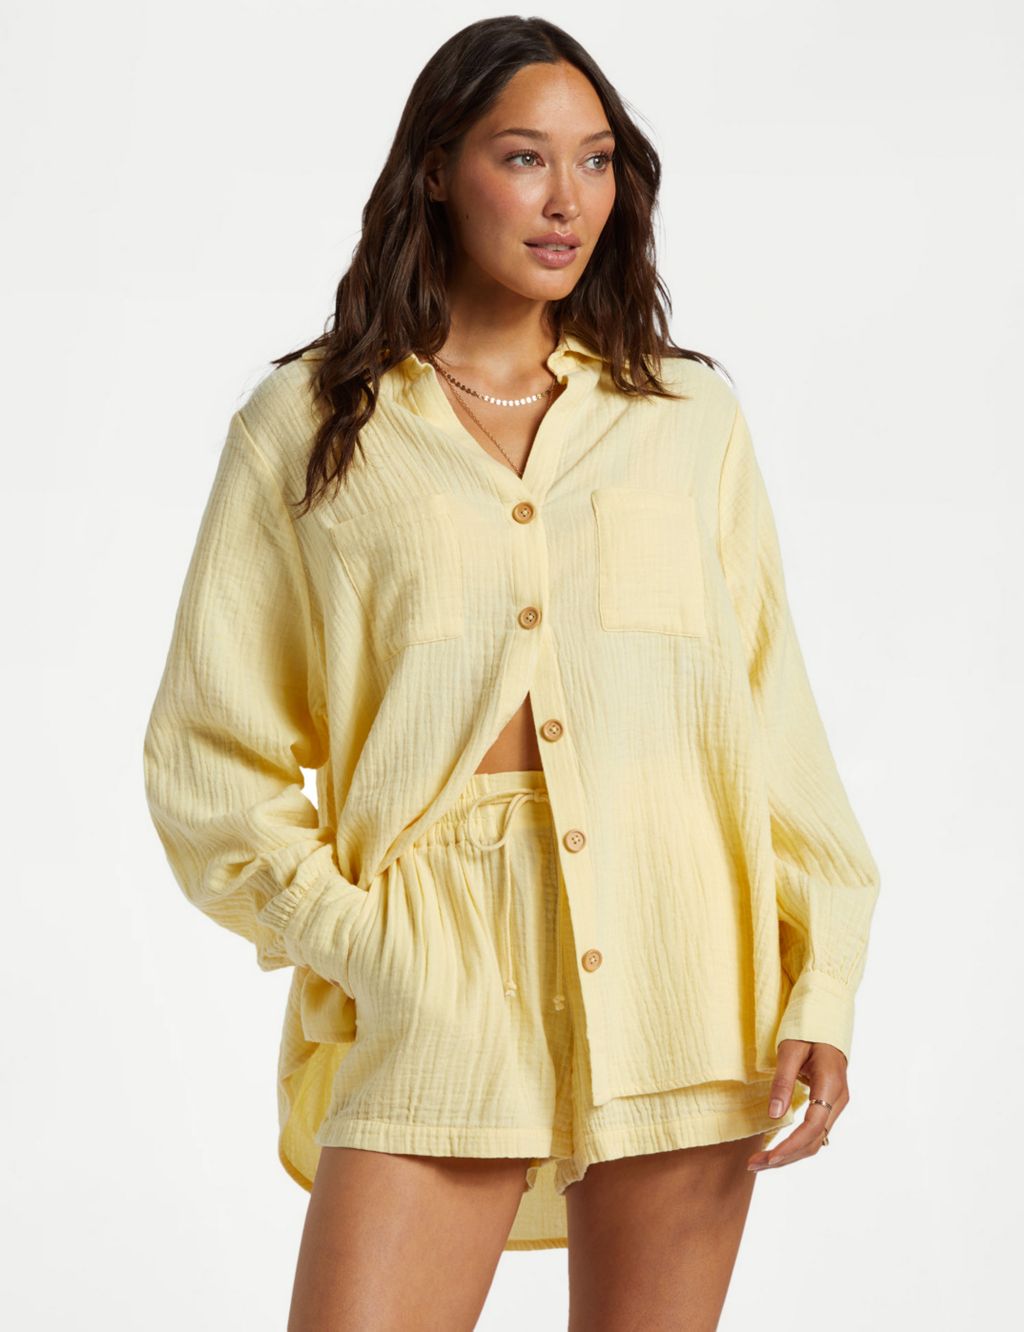 Swell Pure Cotton Beach Cover Up Shirt